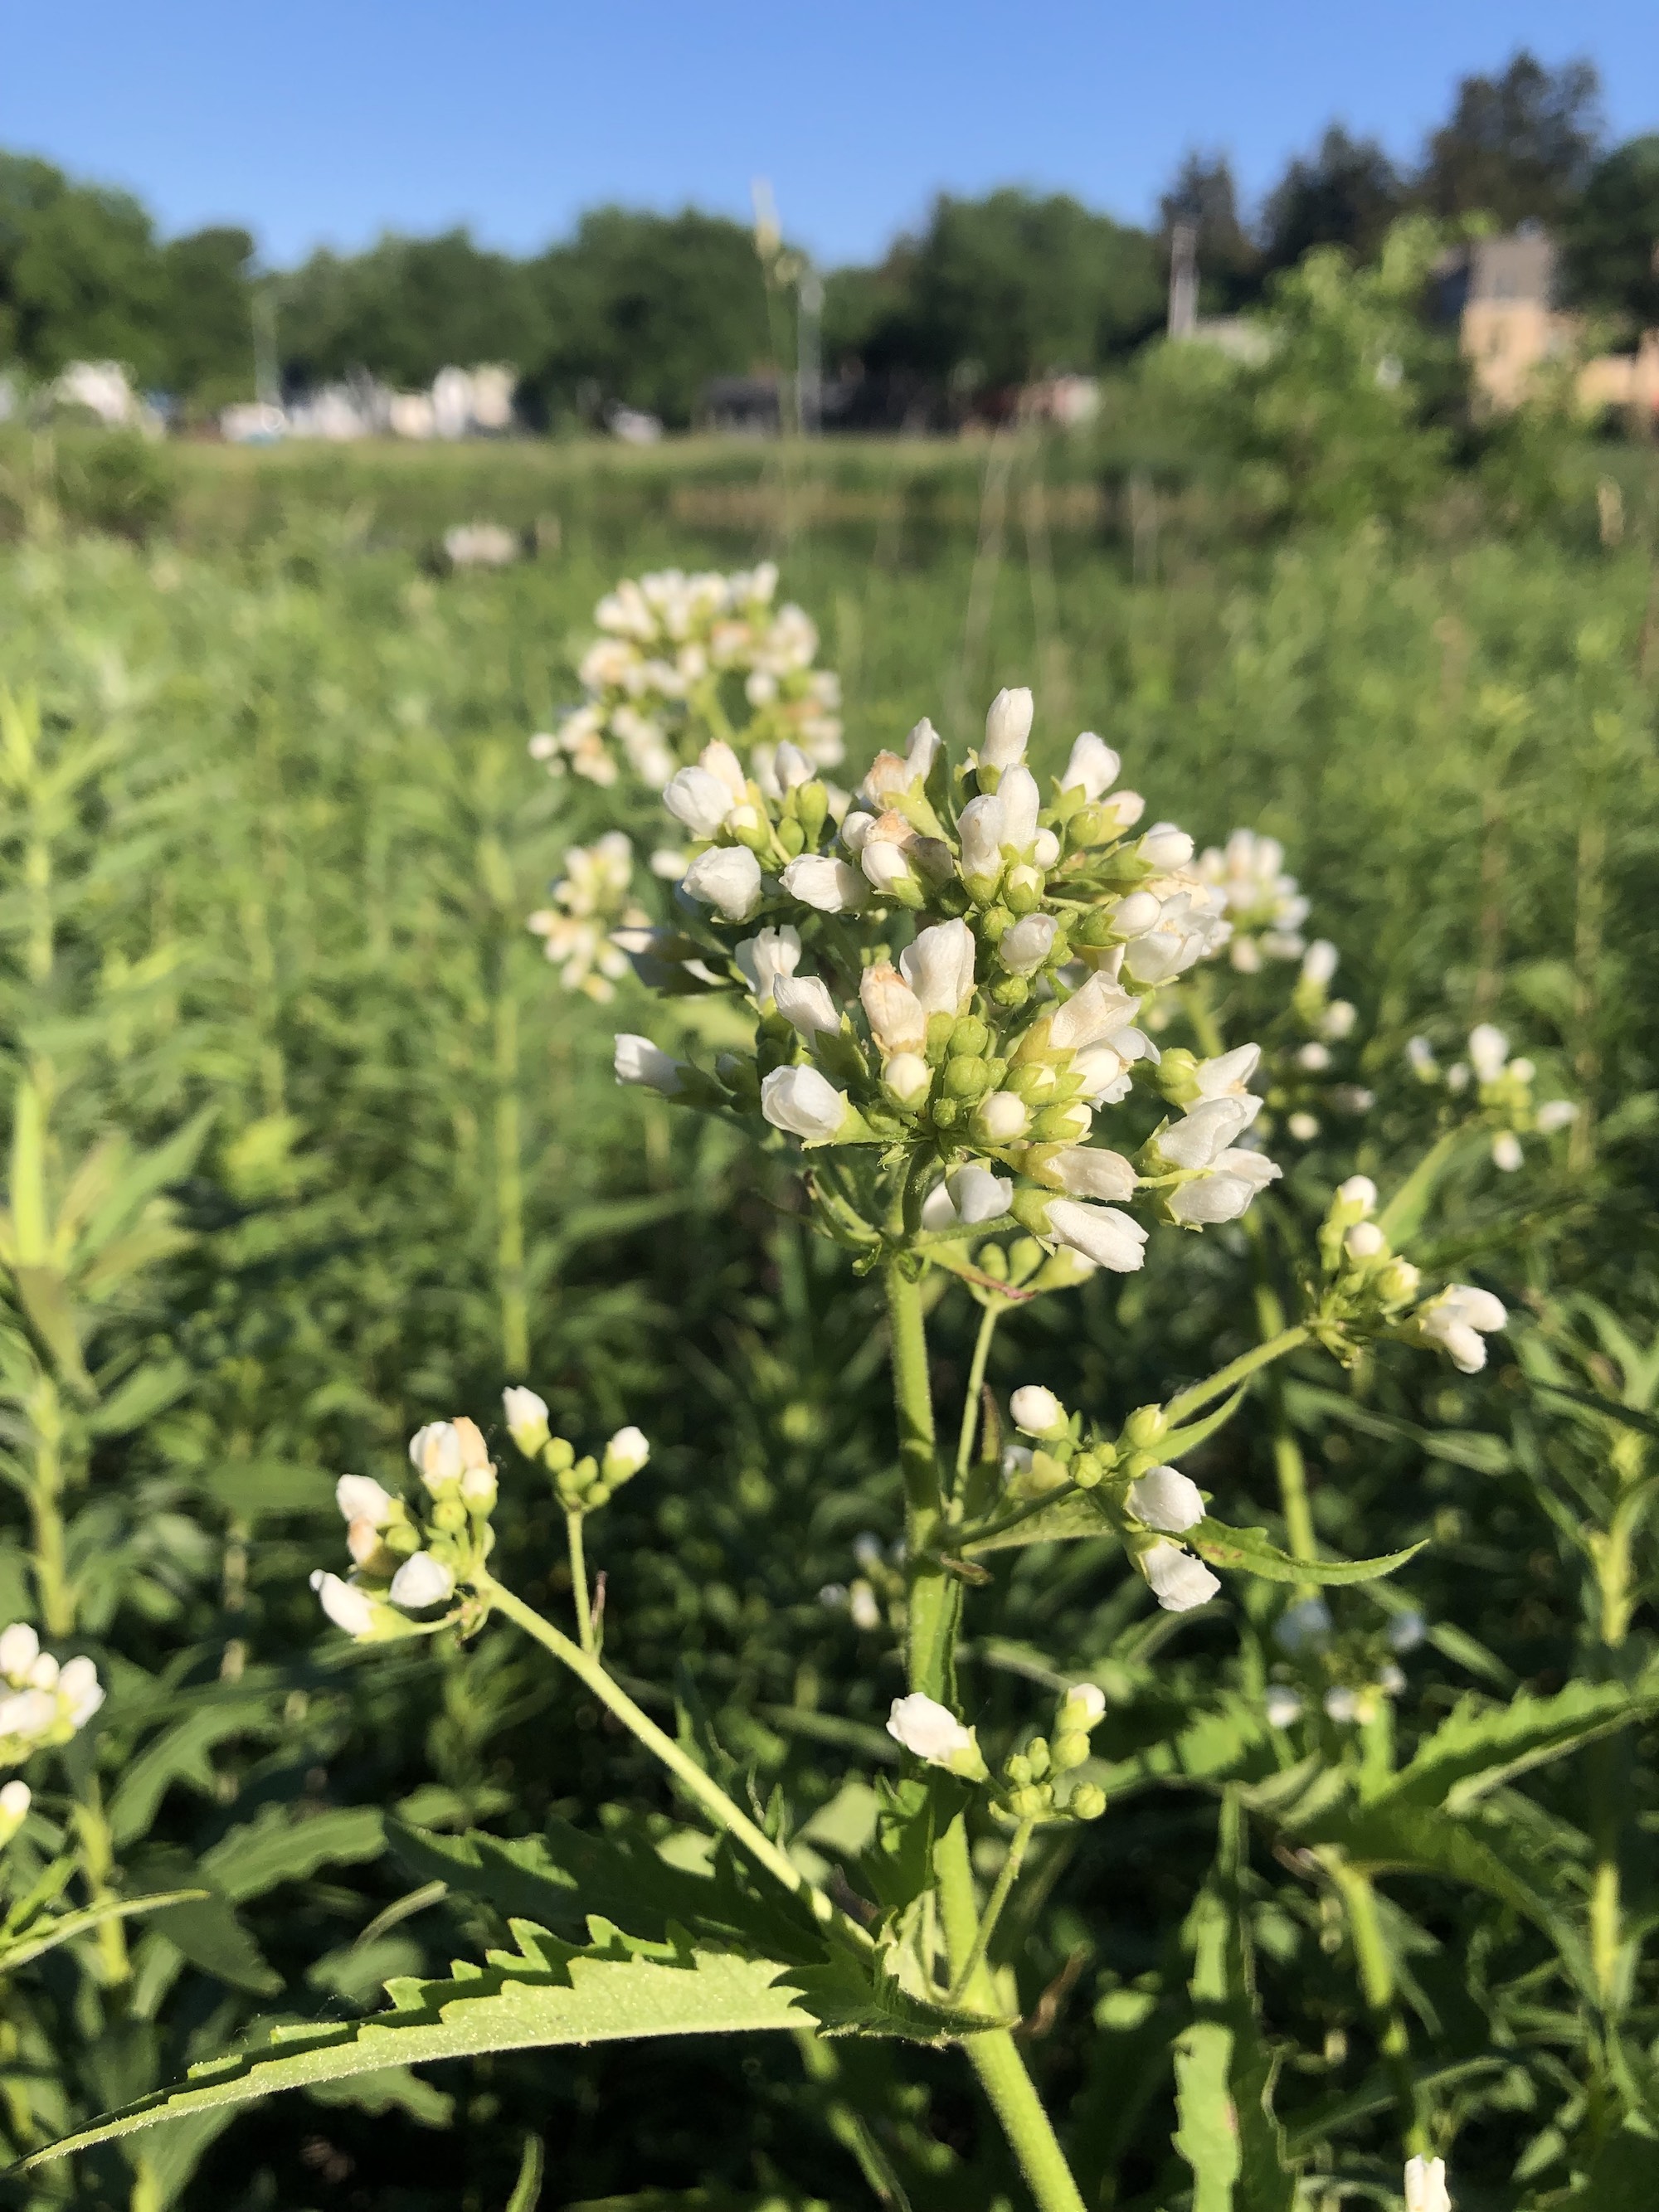 Glade Mallow around Marion Dunn Pond in Madison, Wisconsin on June 16, 2021.